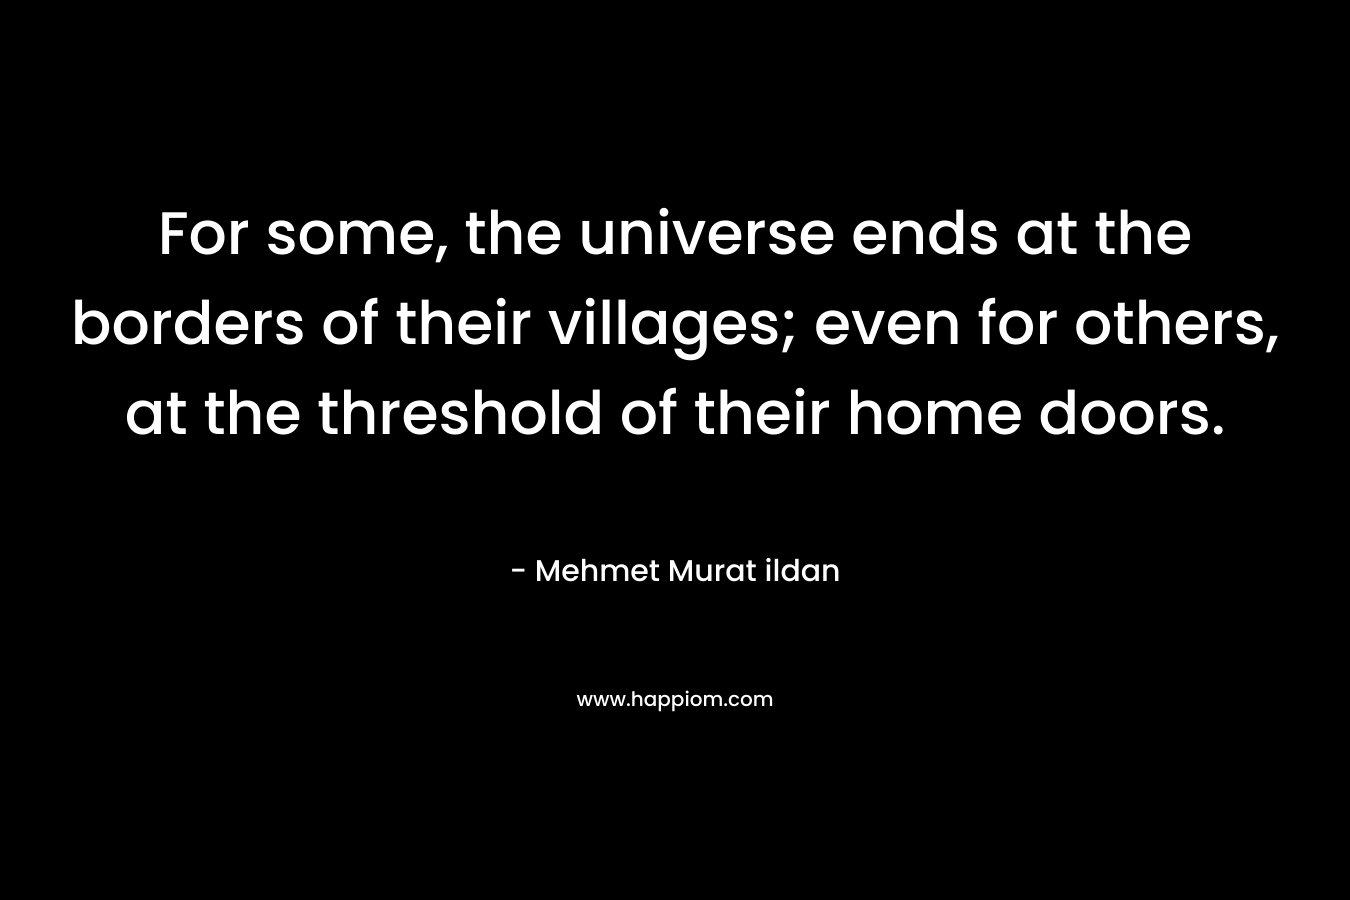 For some, the universe ends at the borders of their villages; even for others, at the threshold of their home doors. – Mehmet Murat ildan